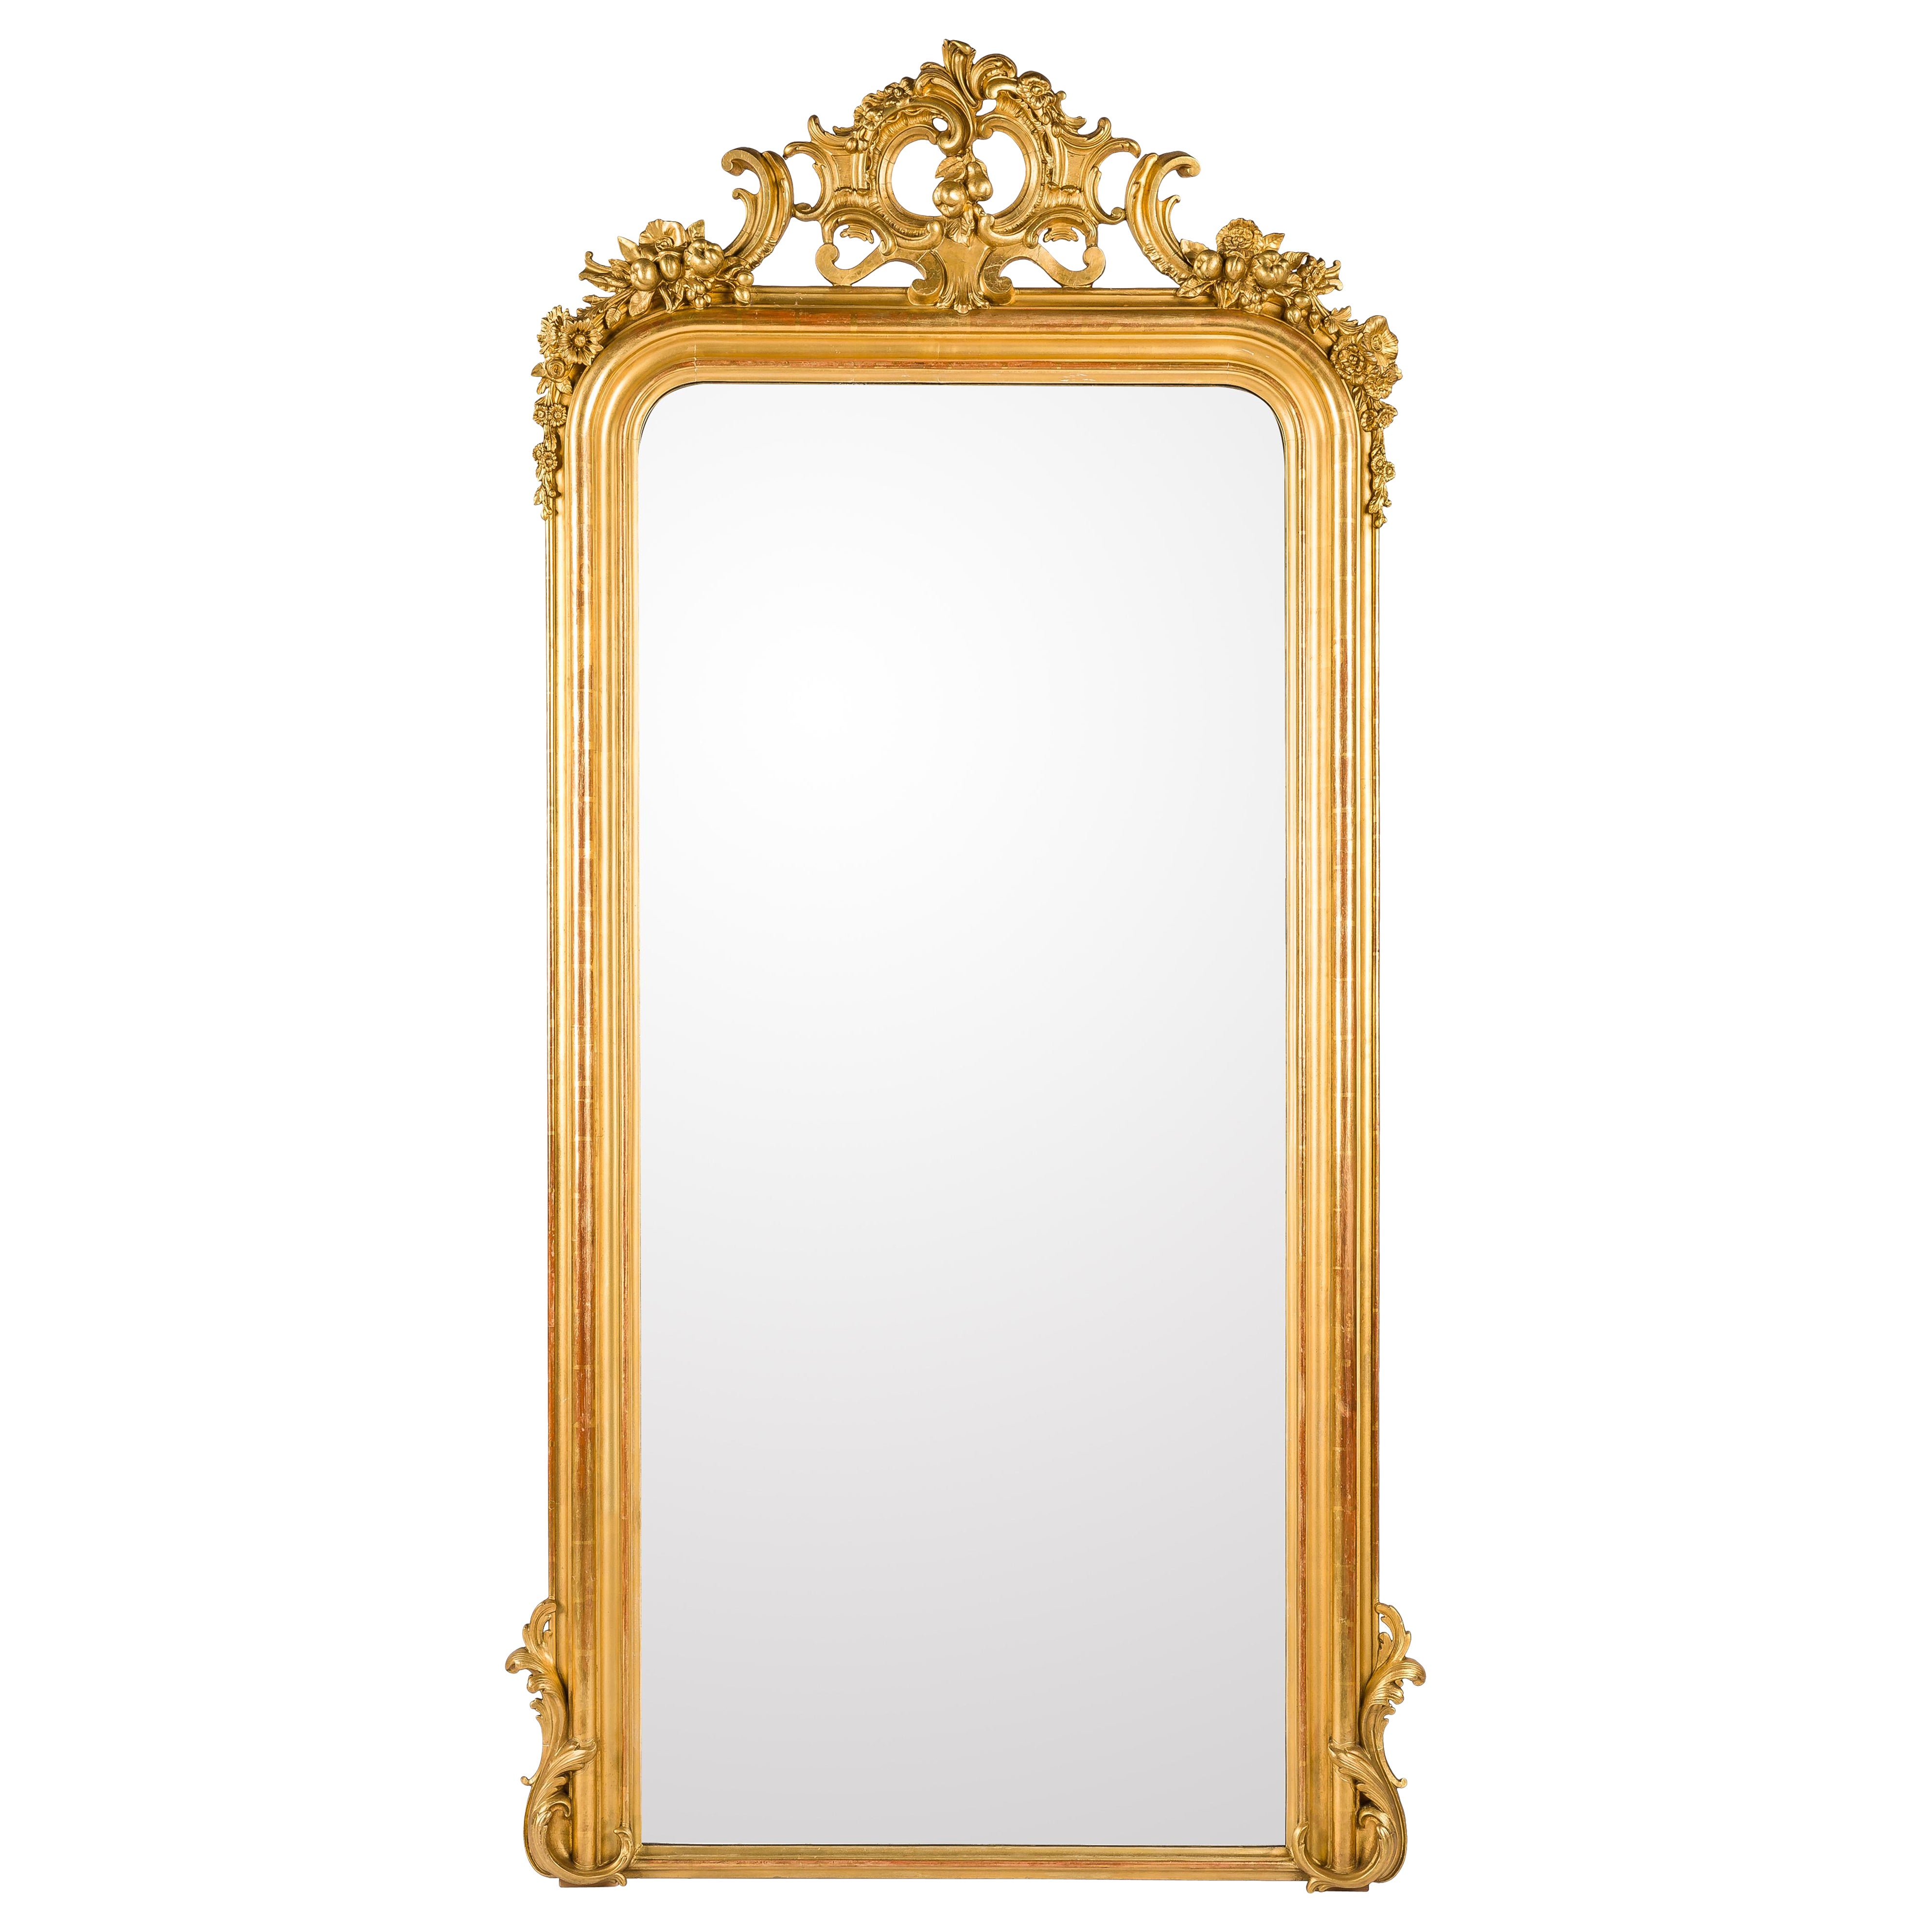 Antique 19thcentury French Monumental Large Gold Leaf Gilt Louis Philippe Mirror For Sale